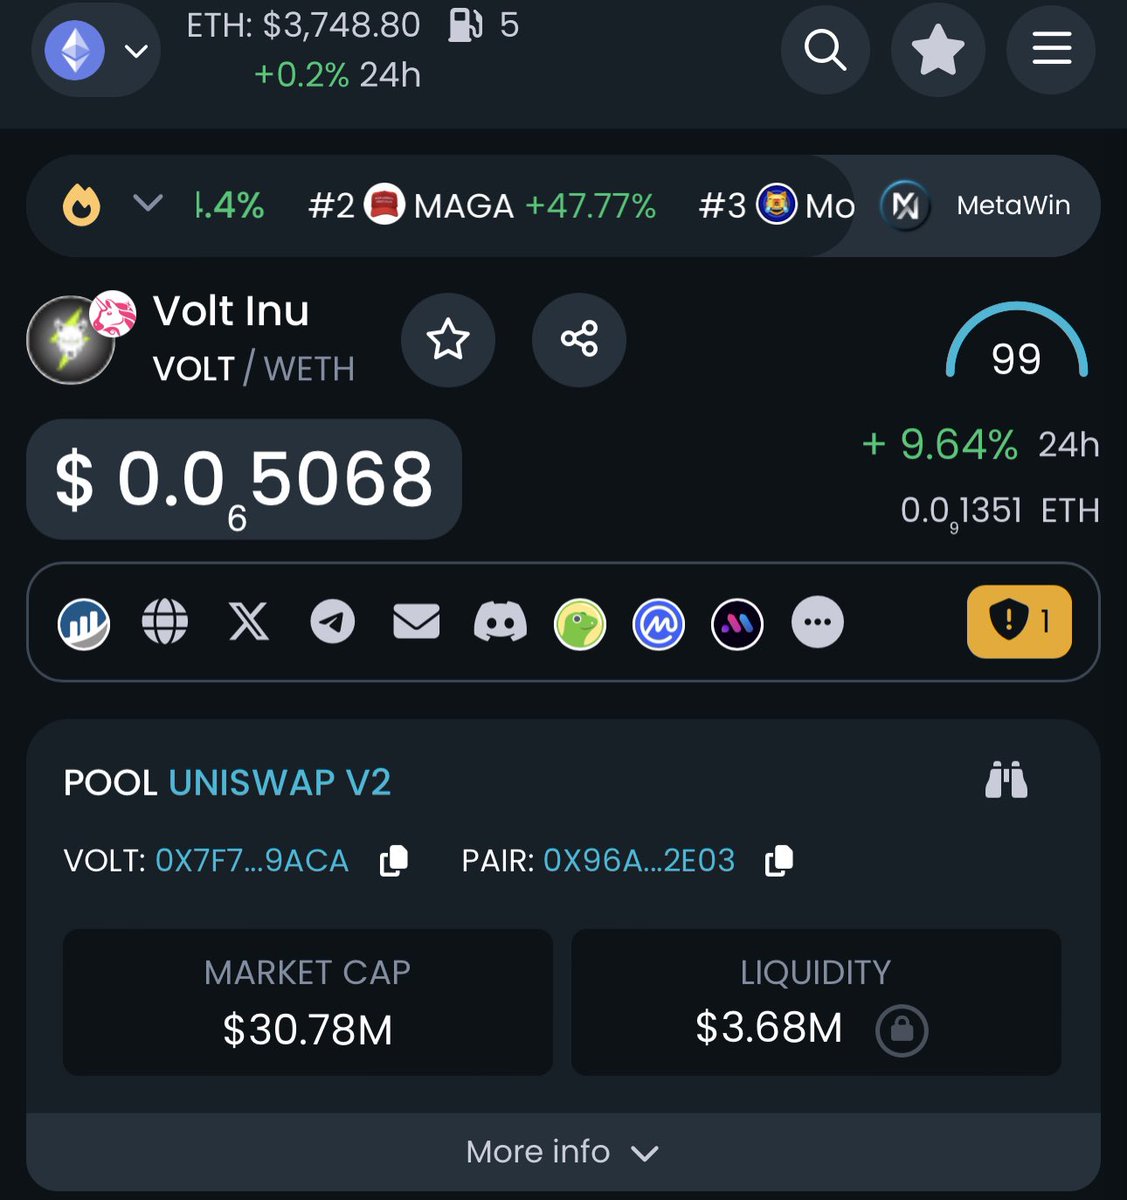 Did you buy the dip? 💰📈⚡️ #VOLT @VoltInuOfficial 💎